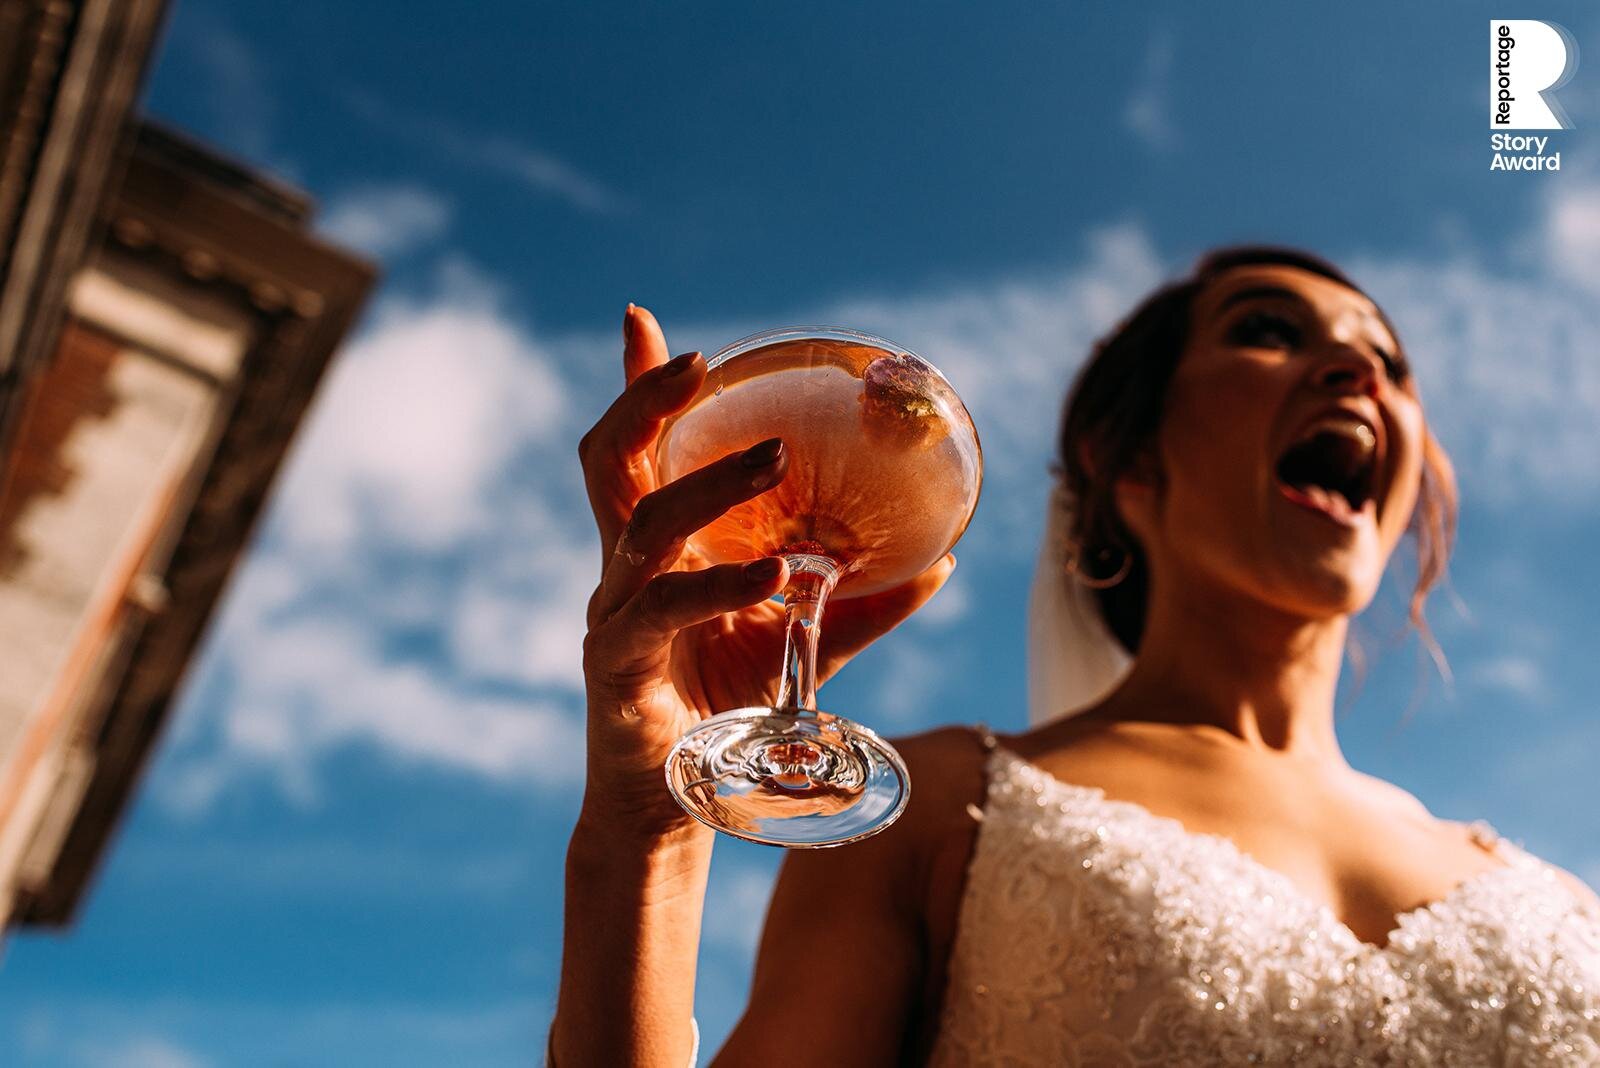  Excited bride, close up of cocktail which contrasts with the blue sky. 